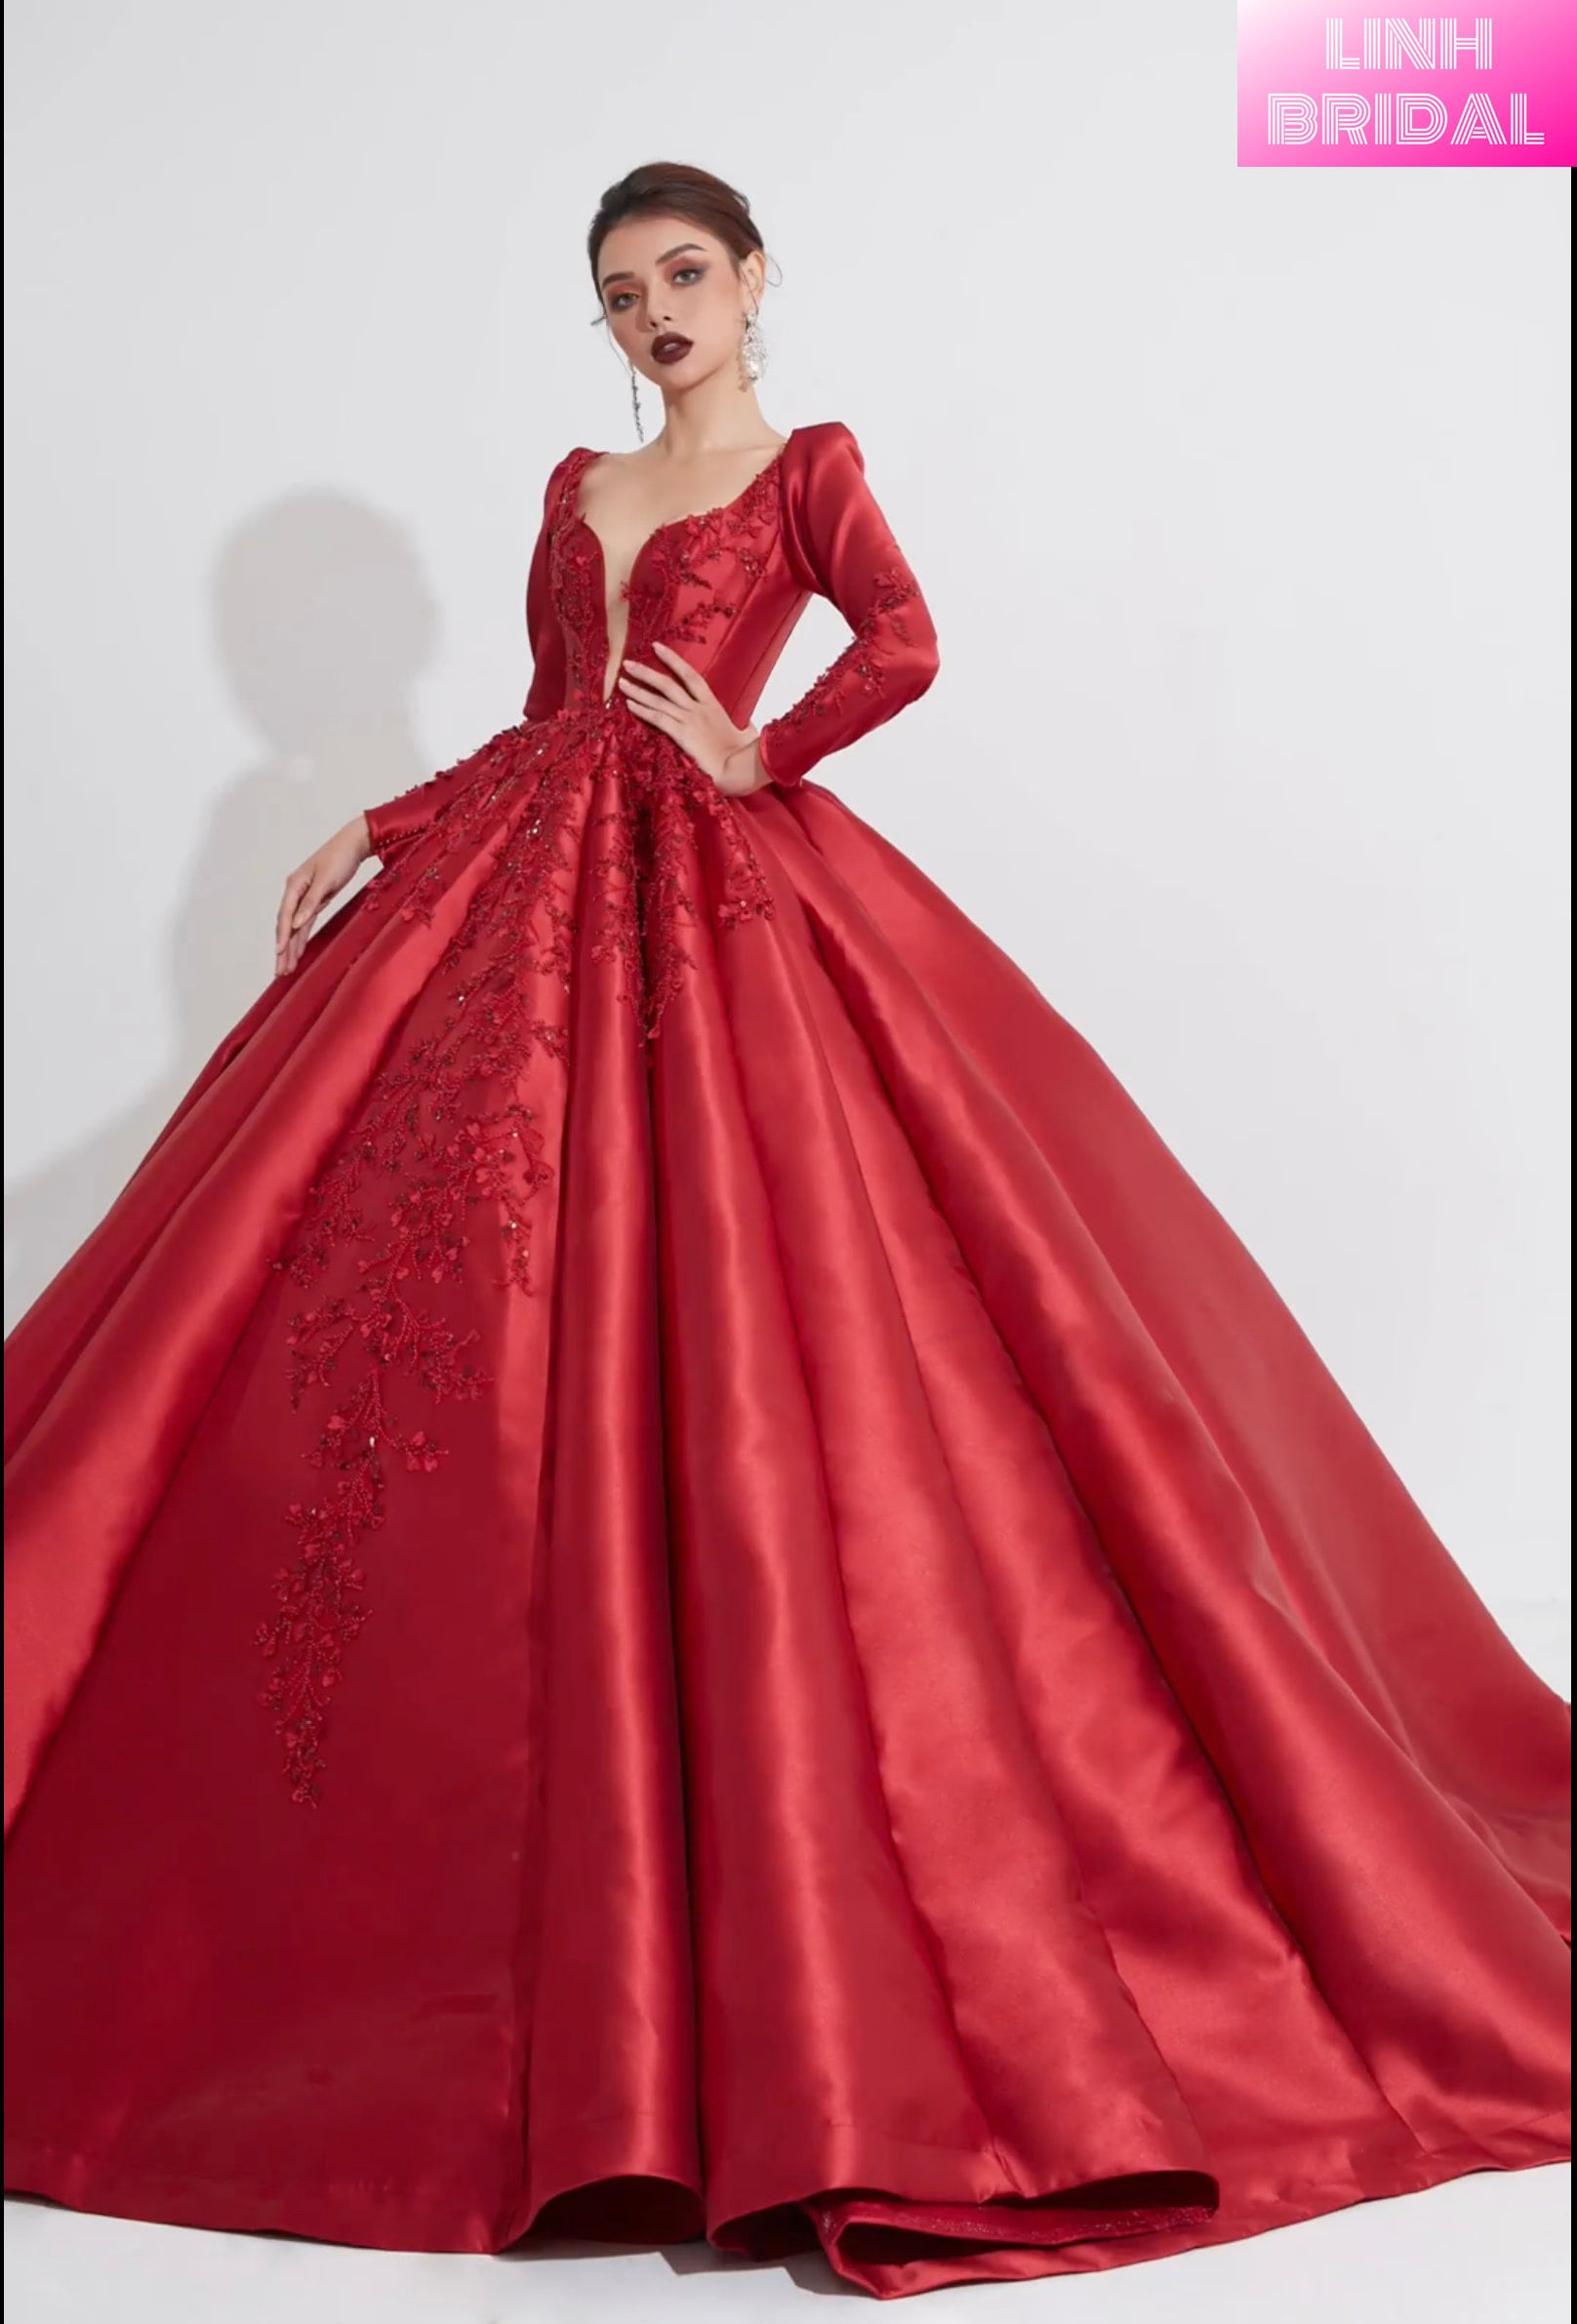 Burgundy Lace Ball Gown Gothic Gothic Wedding Dresses With Long Sleeves,  Corset Back, Heavily Beaded Details, And Non White Colored Bridal Glamour  By Couture From Totallymodest, $140.39 | DHgate.Com